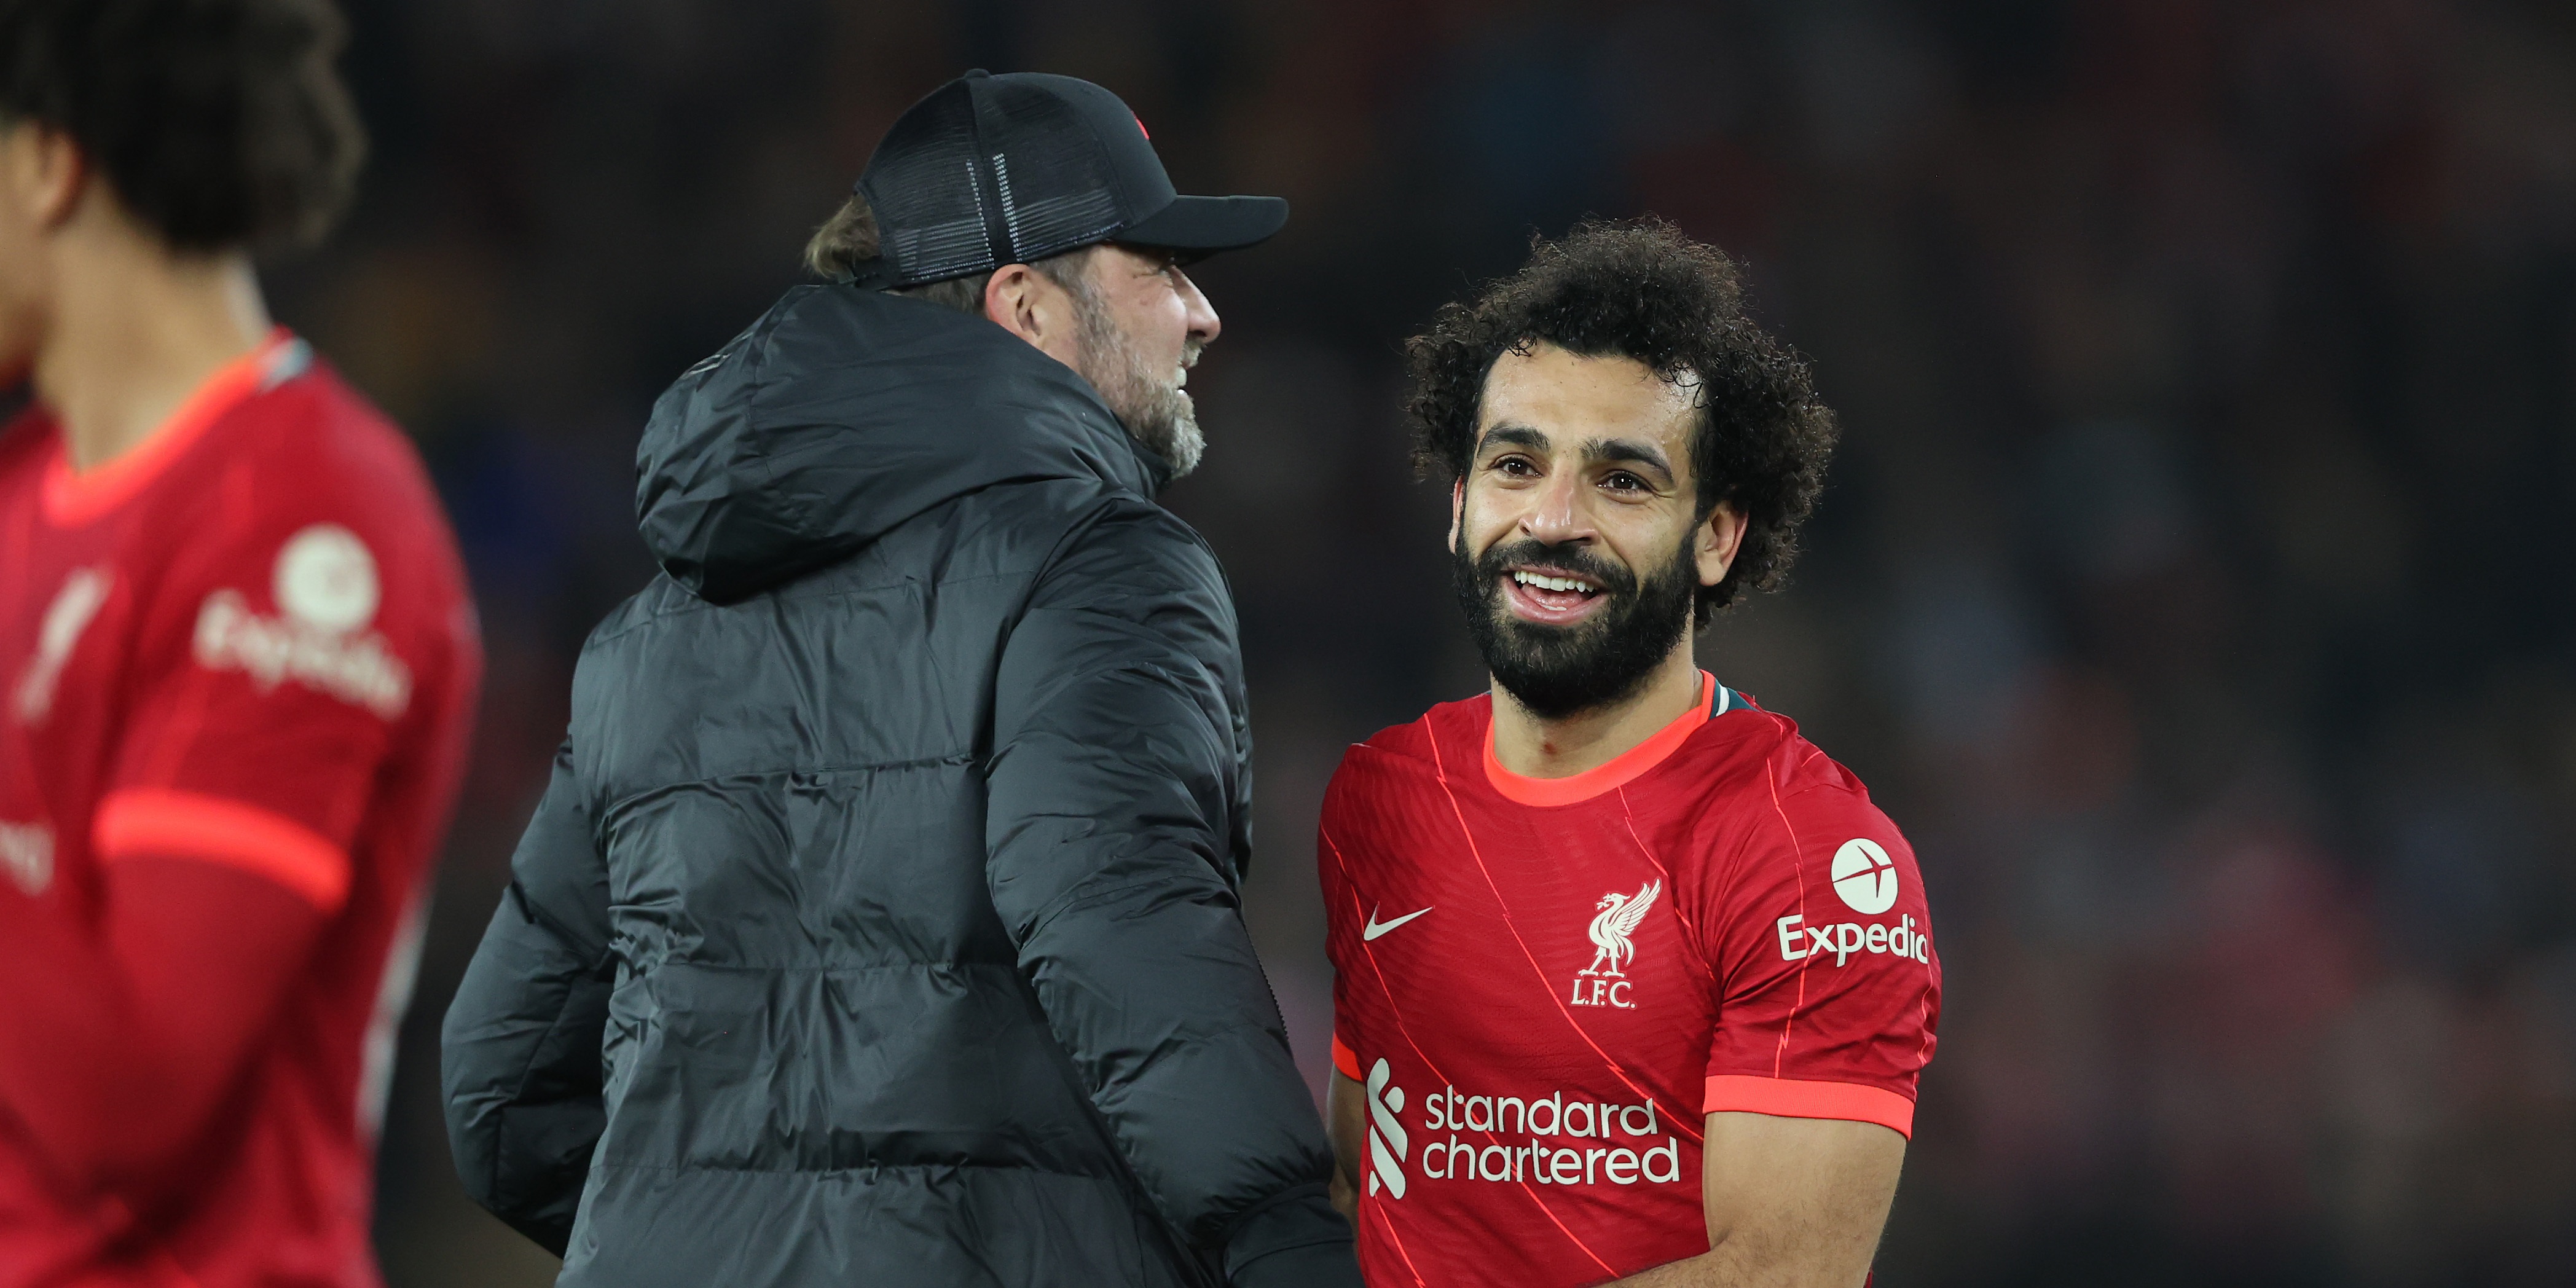 Former Aston Villa striker believes the contract situation between Liverpool and Mo Salah is ‘relaxed’